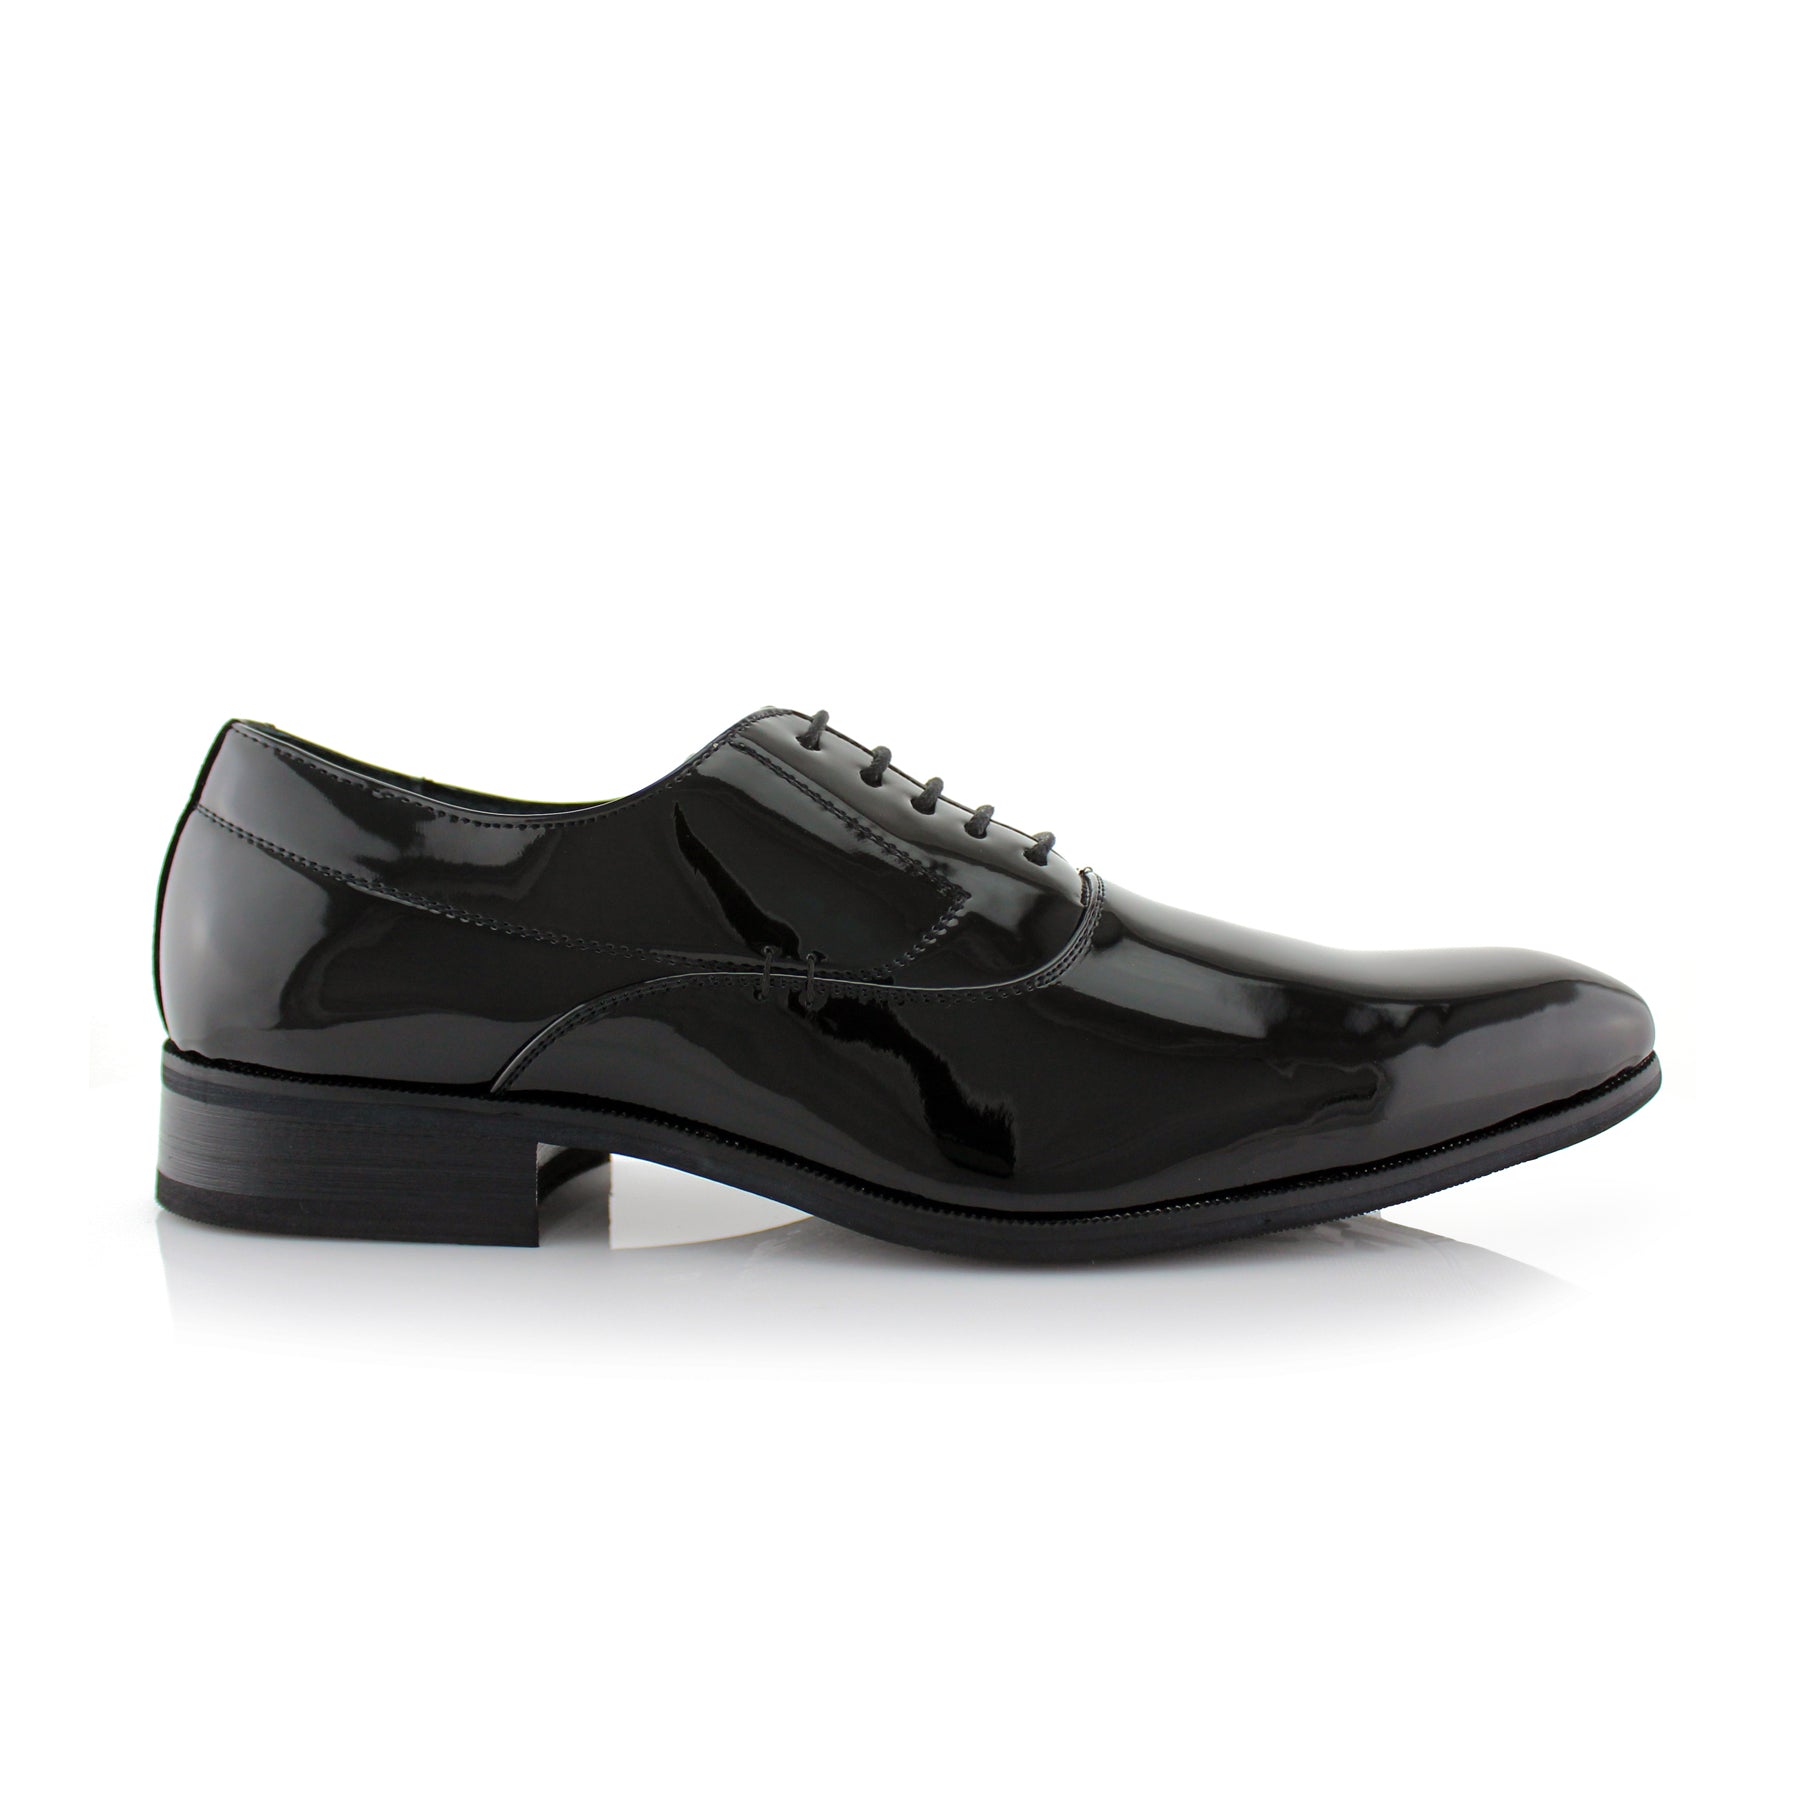 Classic Formal Oxfords | Frank by Delli Aldo | Conal Footwear | Outer Side Angle View